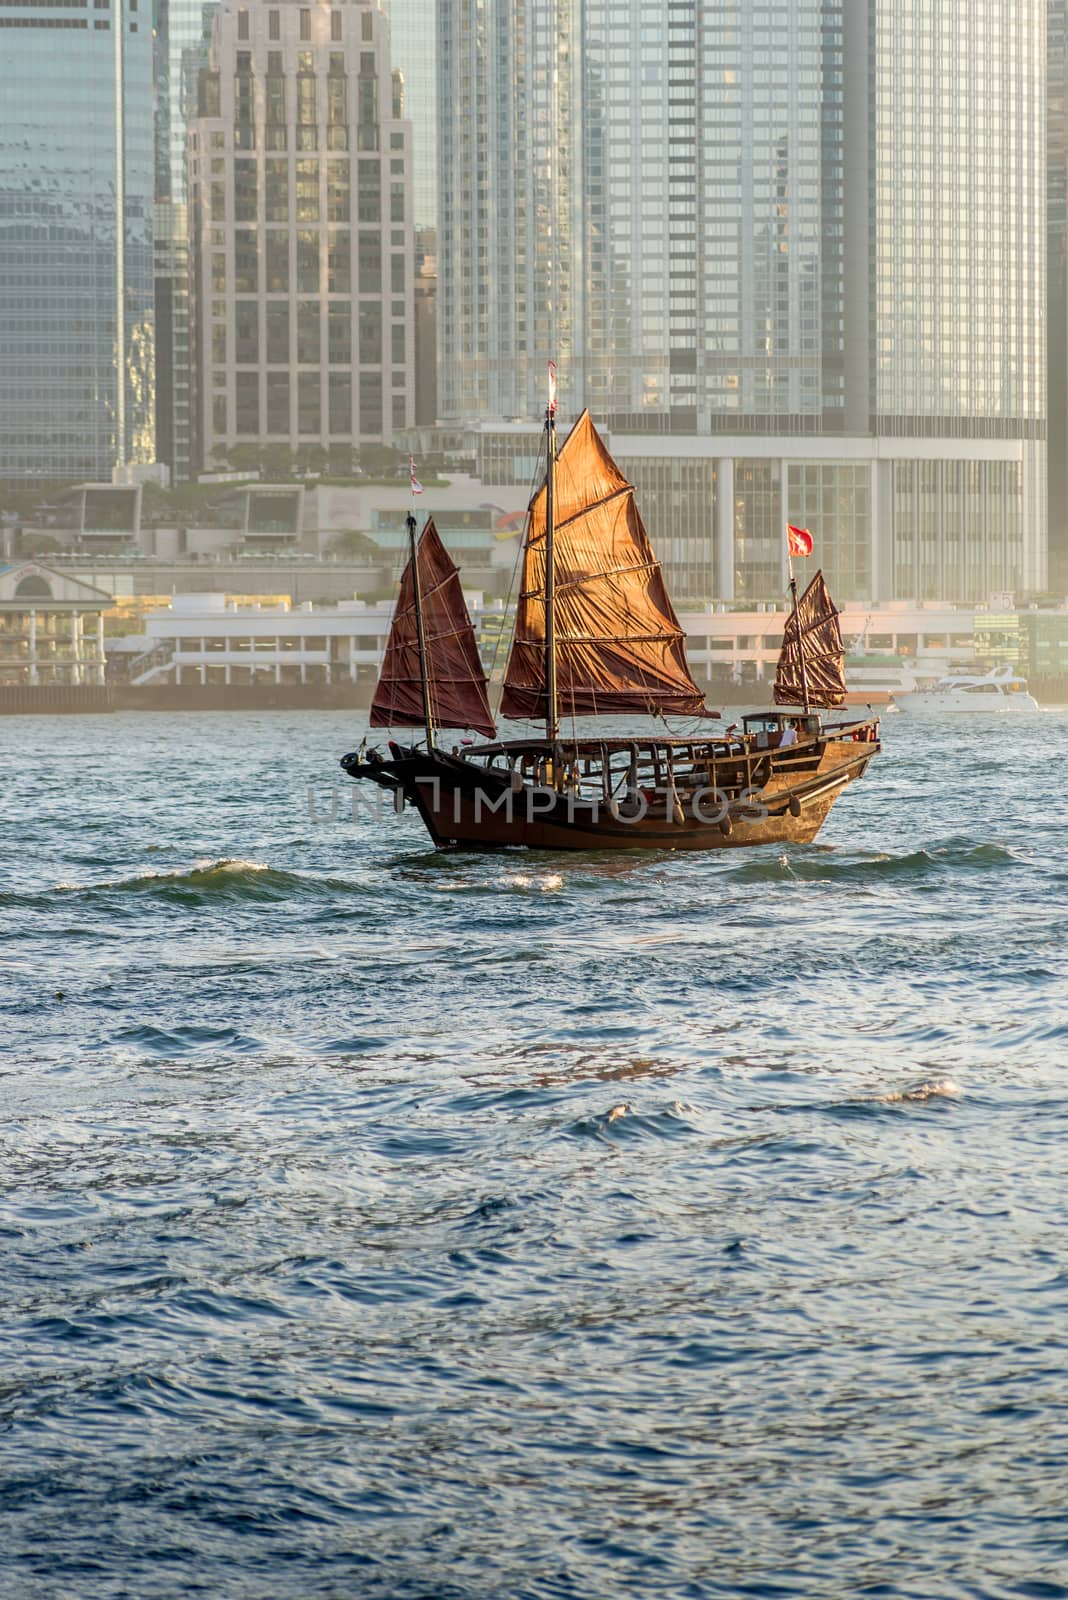 Old Junk on Hong Kong harbour with the sunlight hitting the sails and modern buildings in the background.